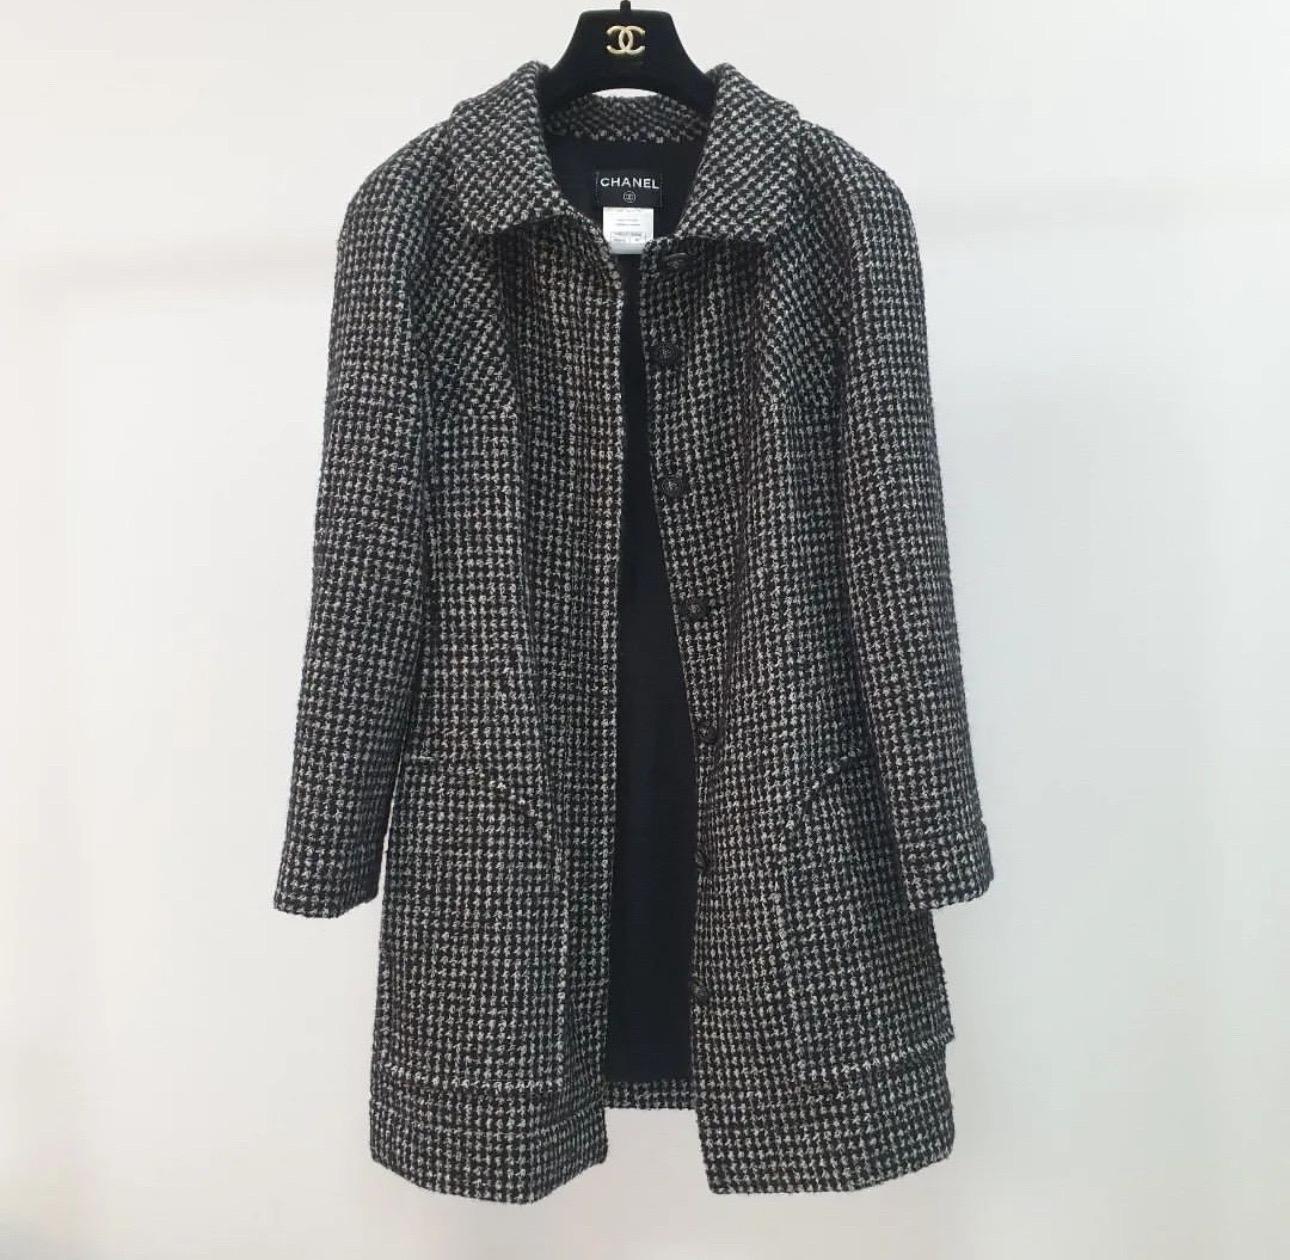 CHANEL 14PF  Wool Silk Tweed Coat  In Excellent Condition For Sale In Krakow, PL